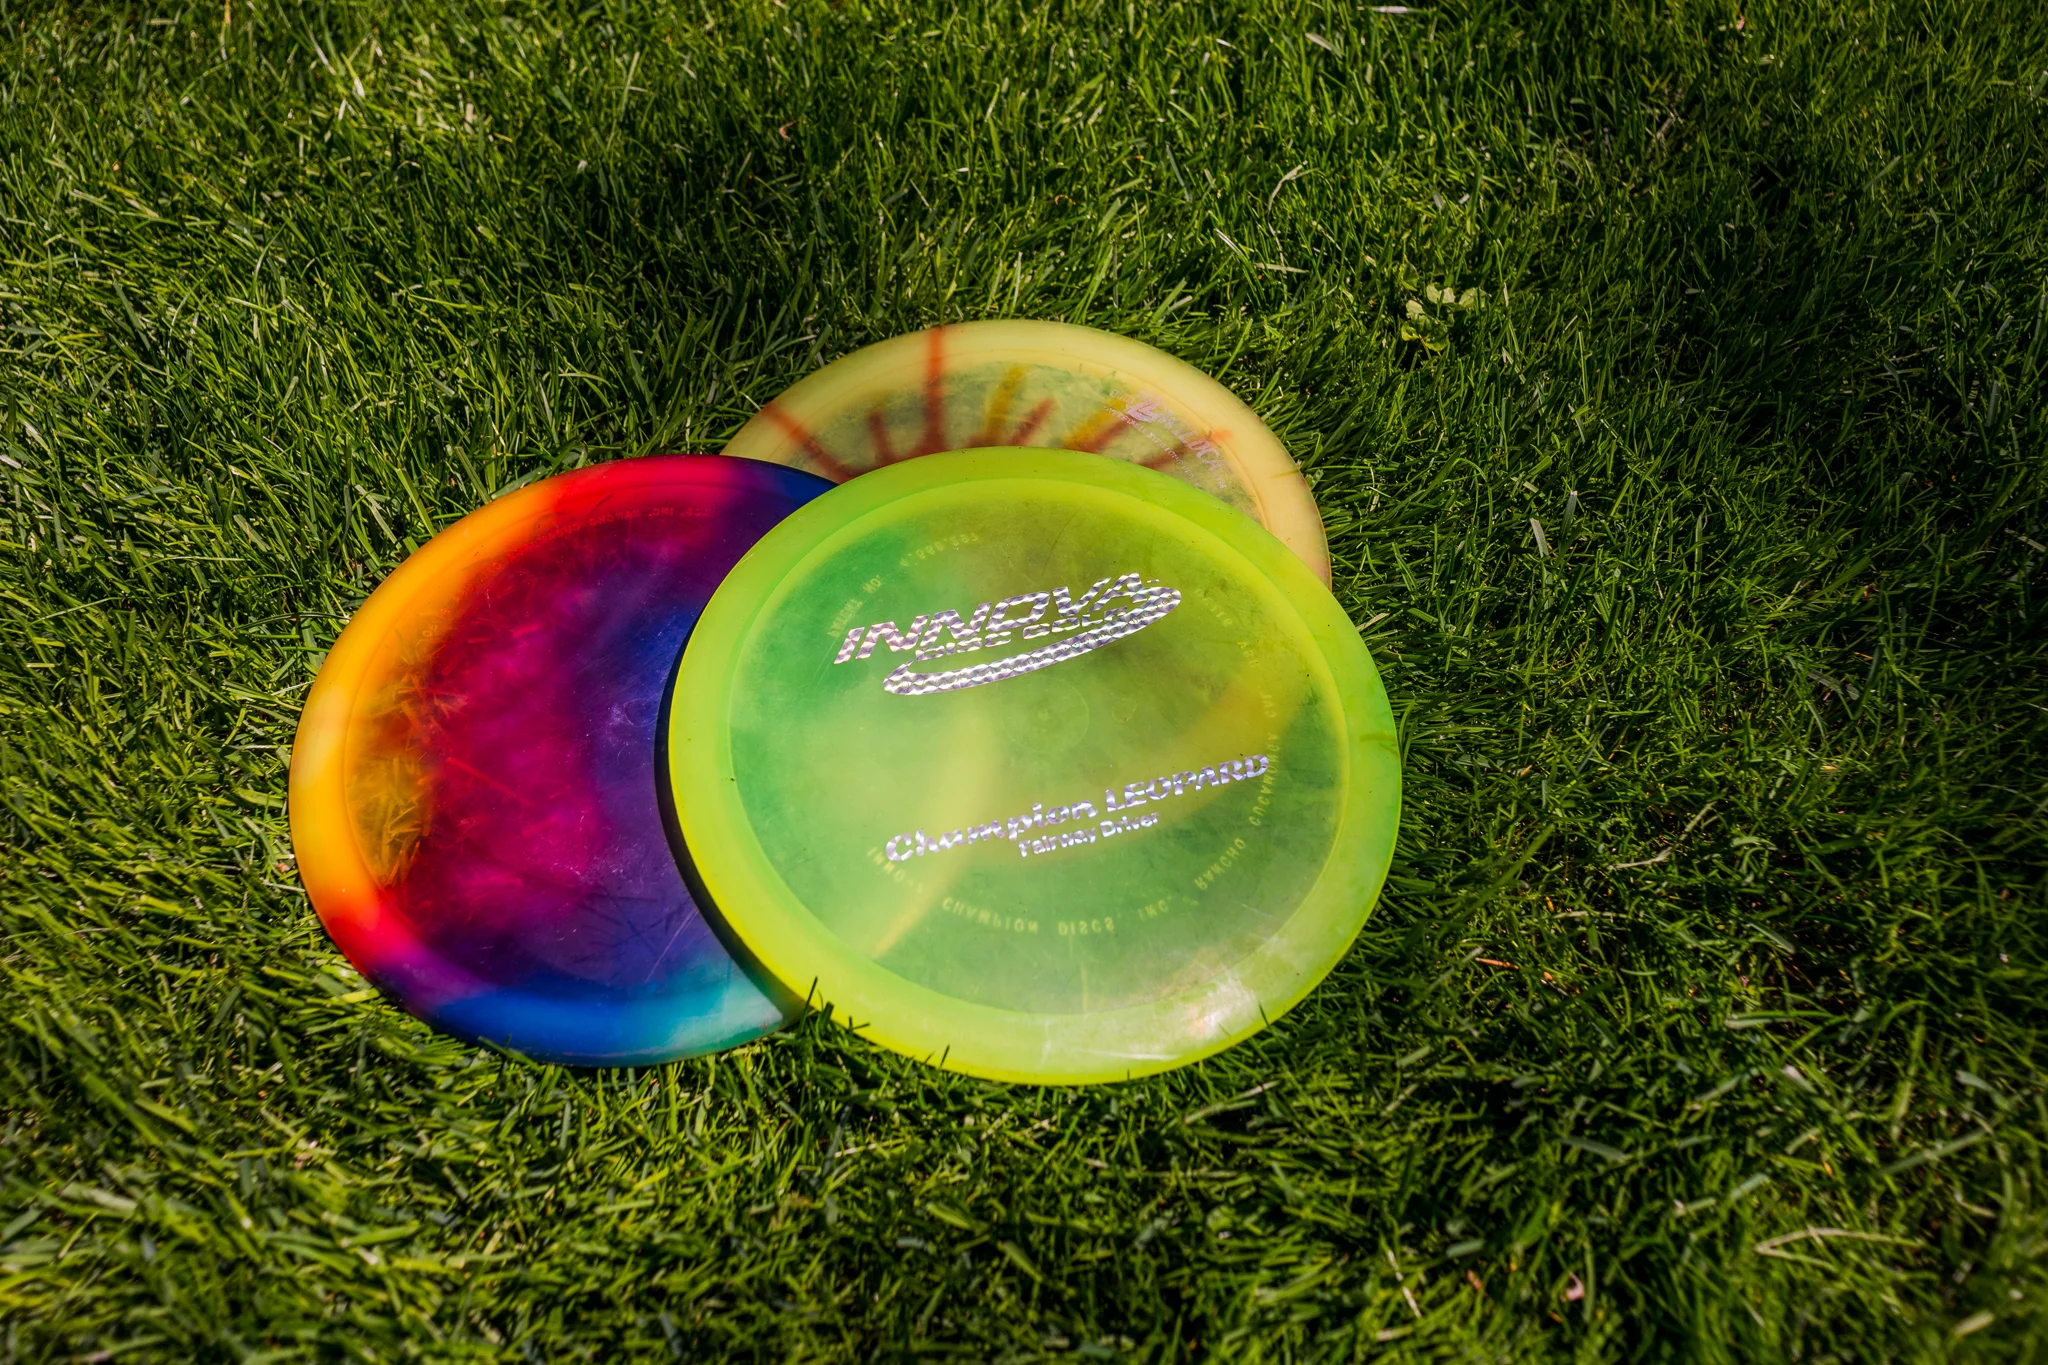 Disc Golf Coming To Stouffville? Ken Laushway Woodlot Could Host New Course, Stouffville